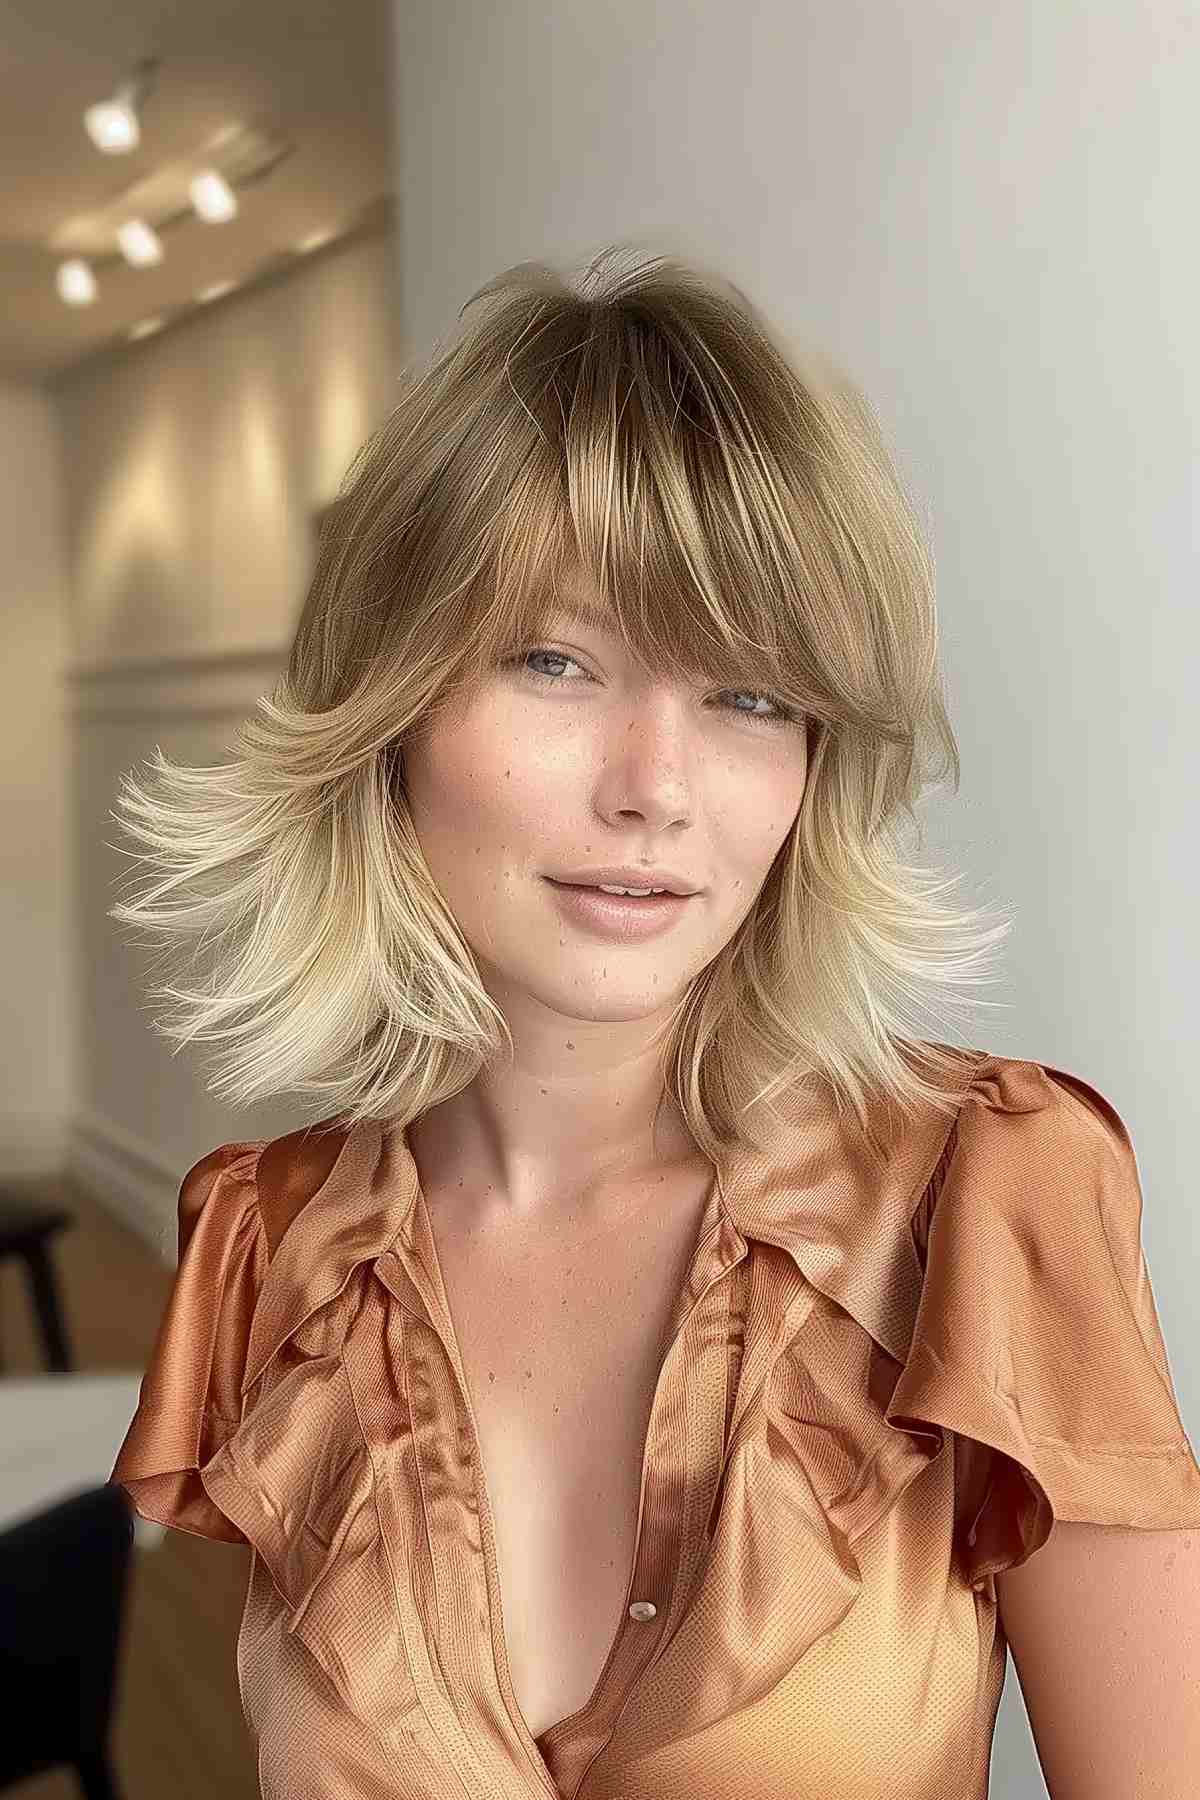 A woman with a retro 70s style long bob and bangs.